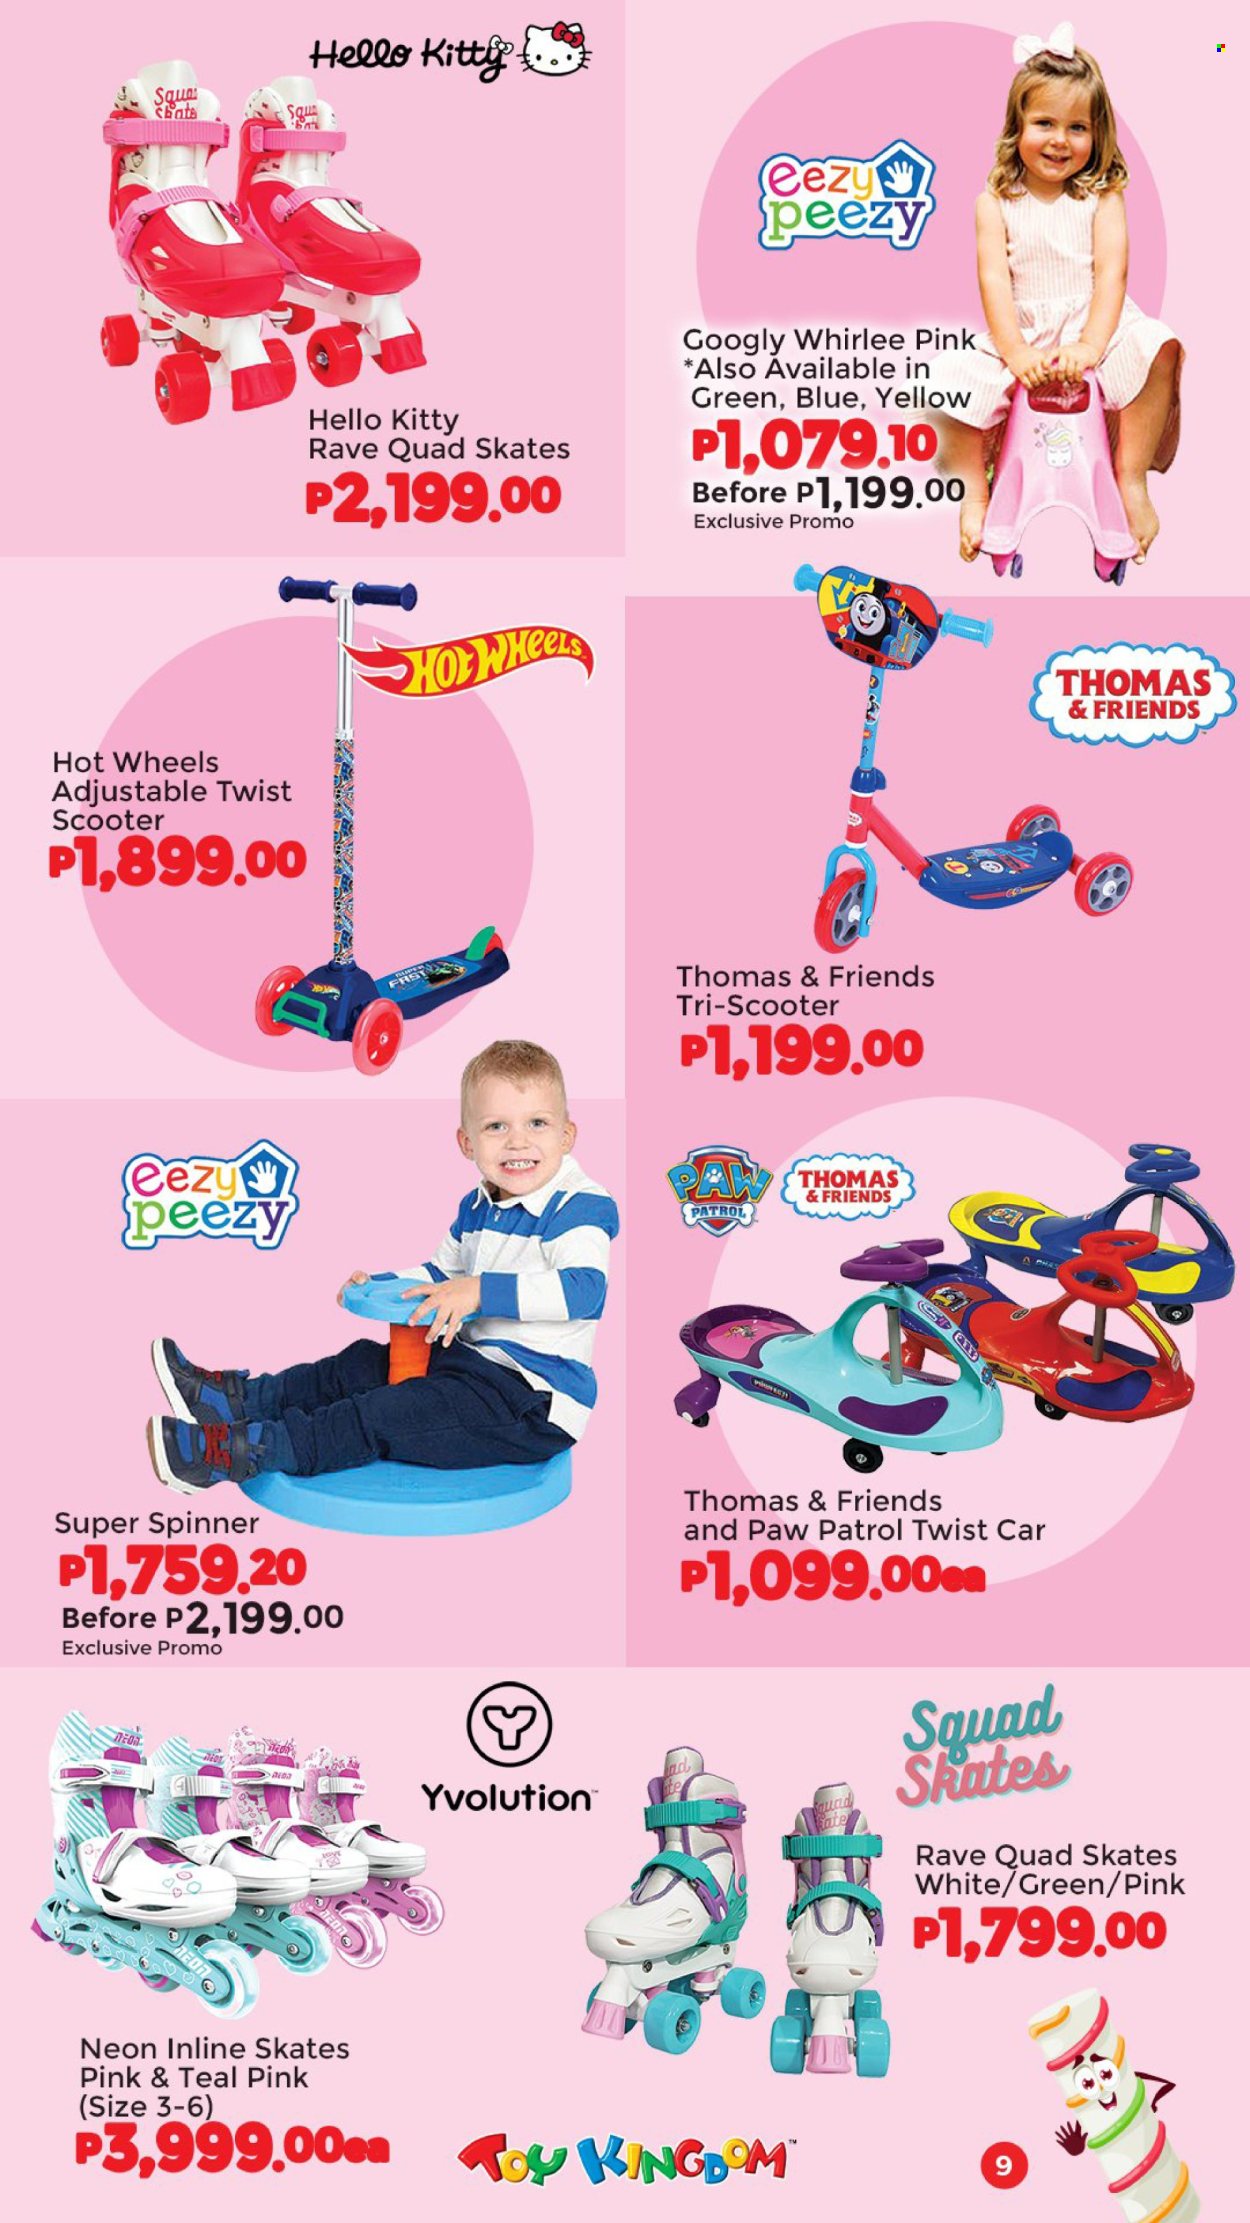 thumbnail - Toy Kingdom offer  - Sales products - Hot Wheels, Hello Kitty, Thomas & Friends, Paw Patrol, toys, spinner. Page 9.